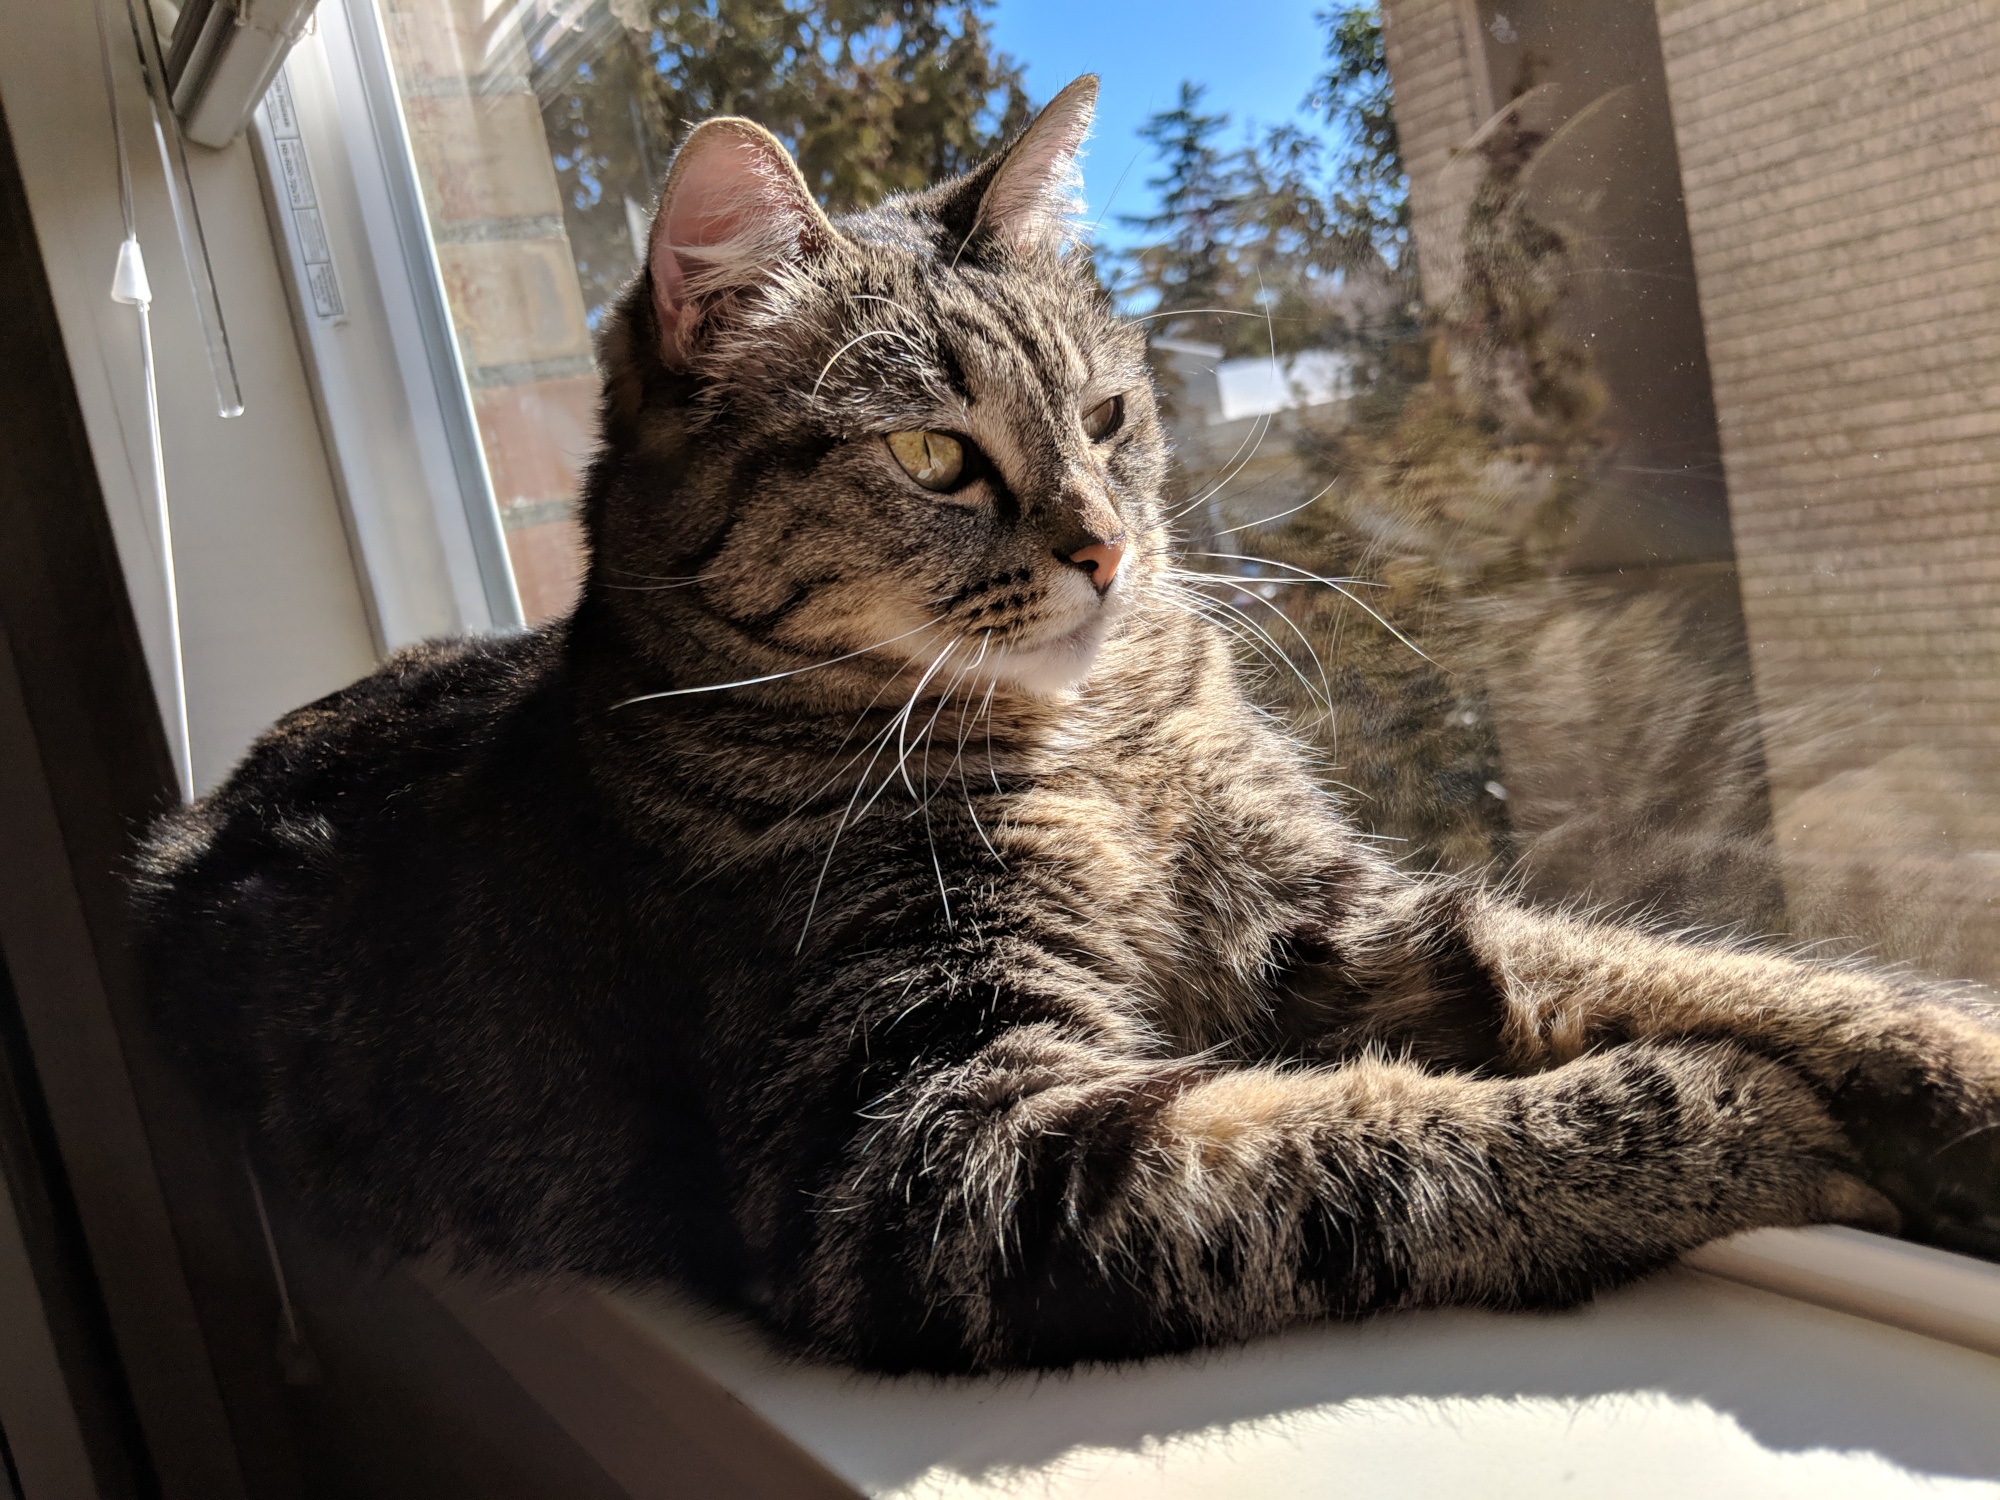 A picture of my cat Emmy sitting in the window in the sun.